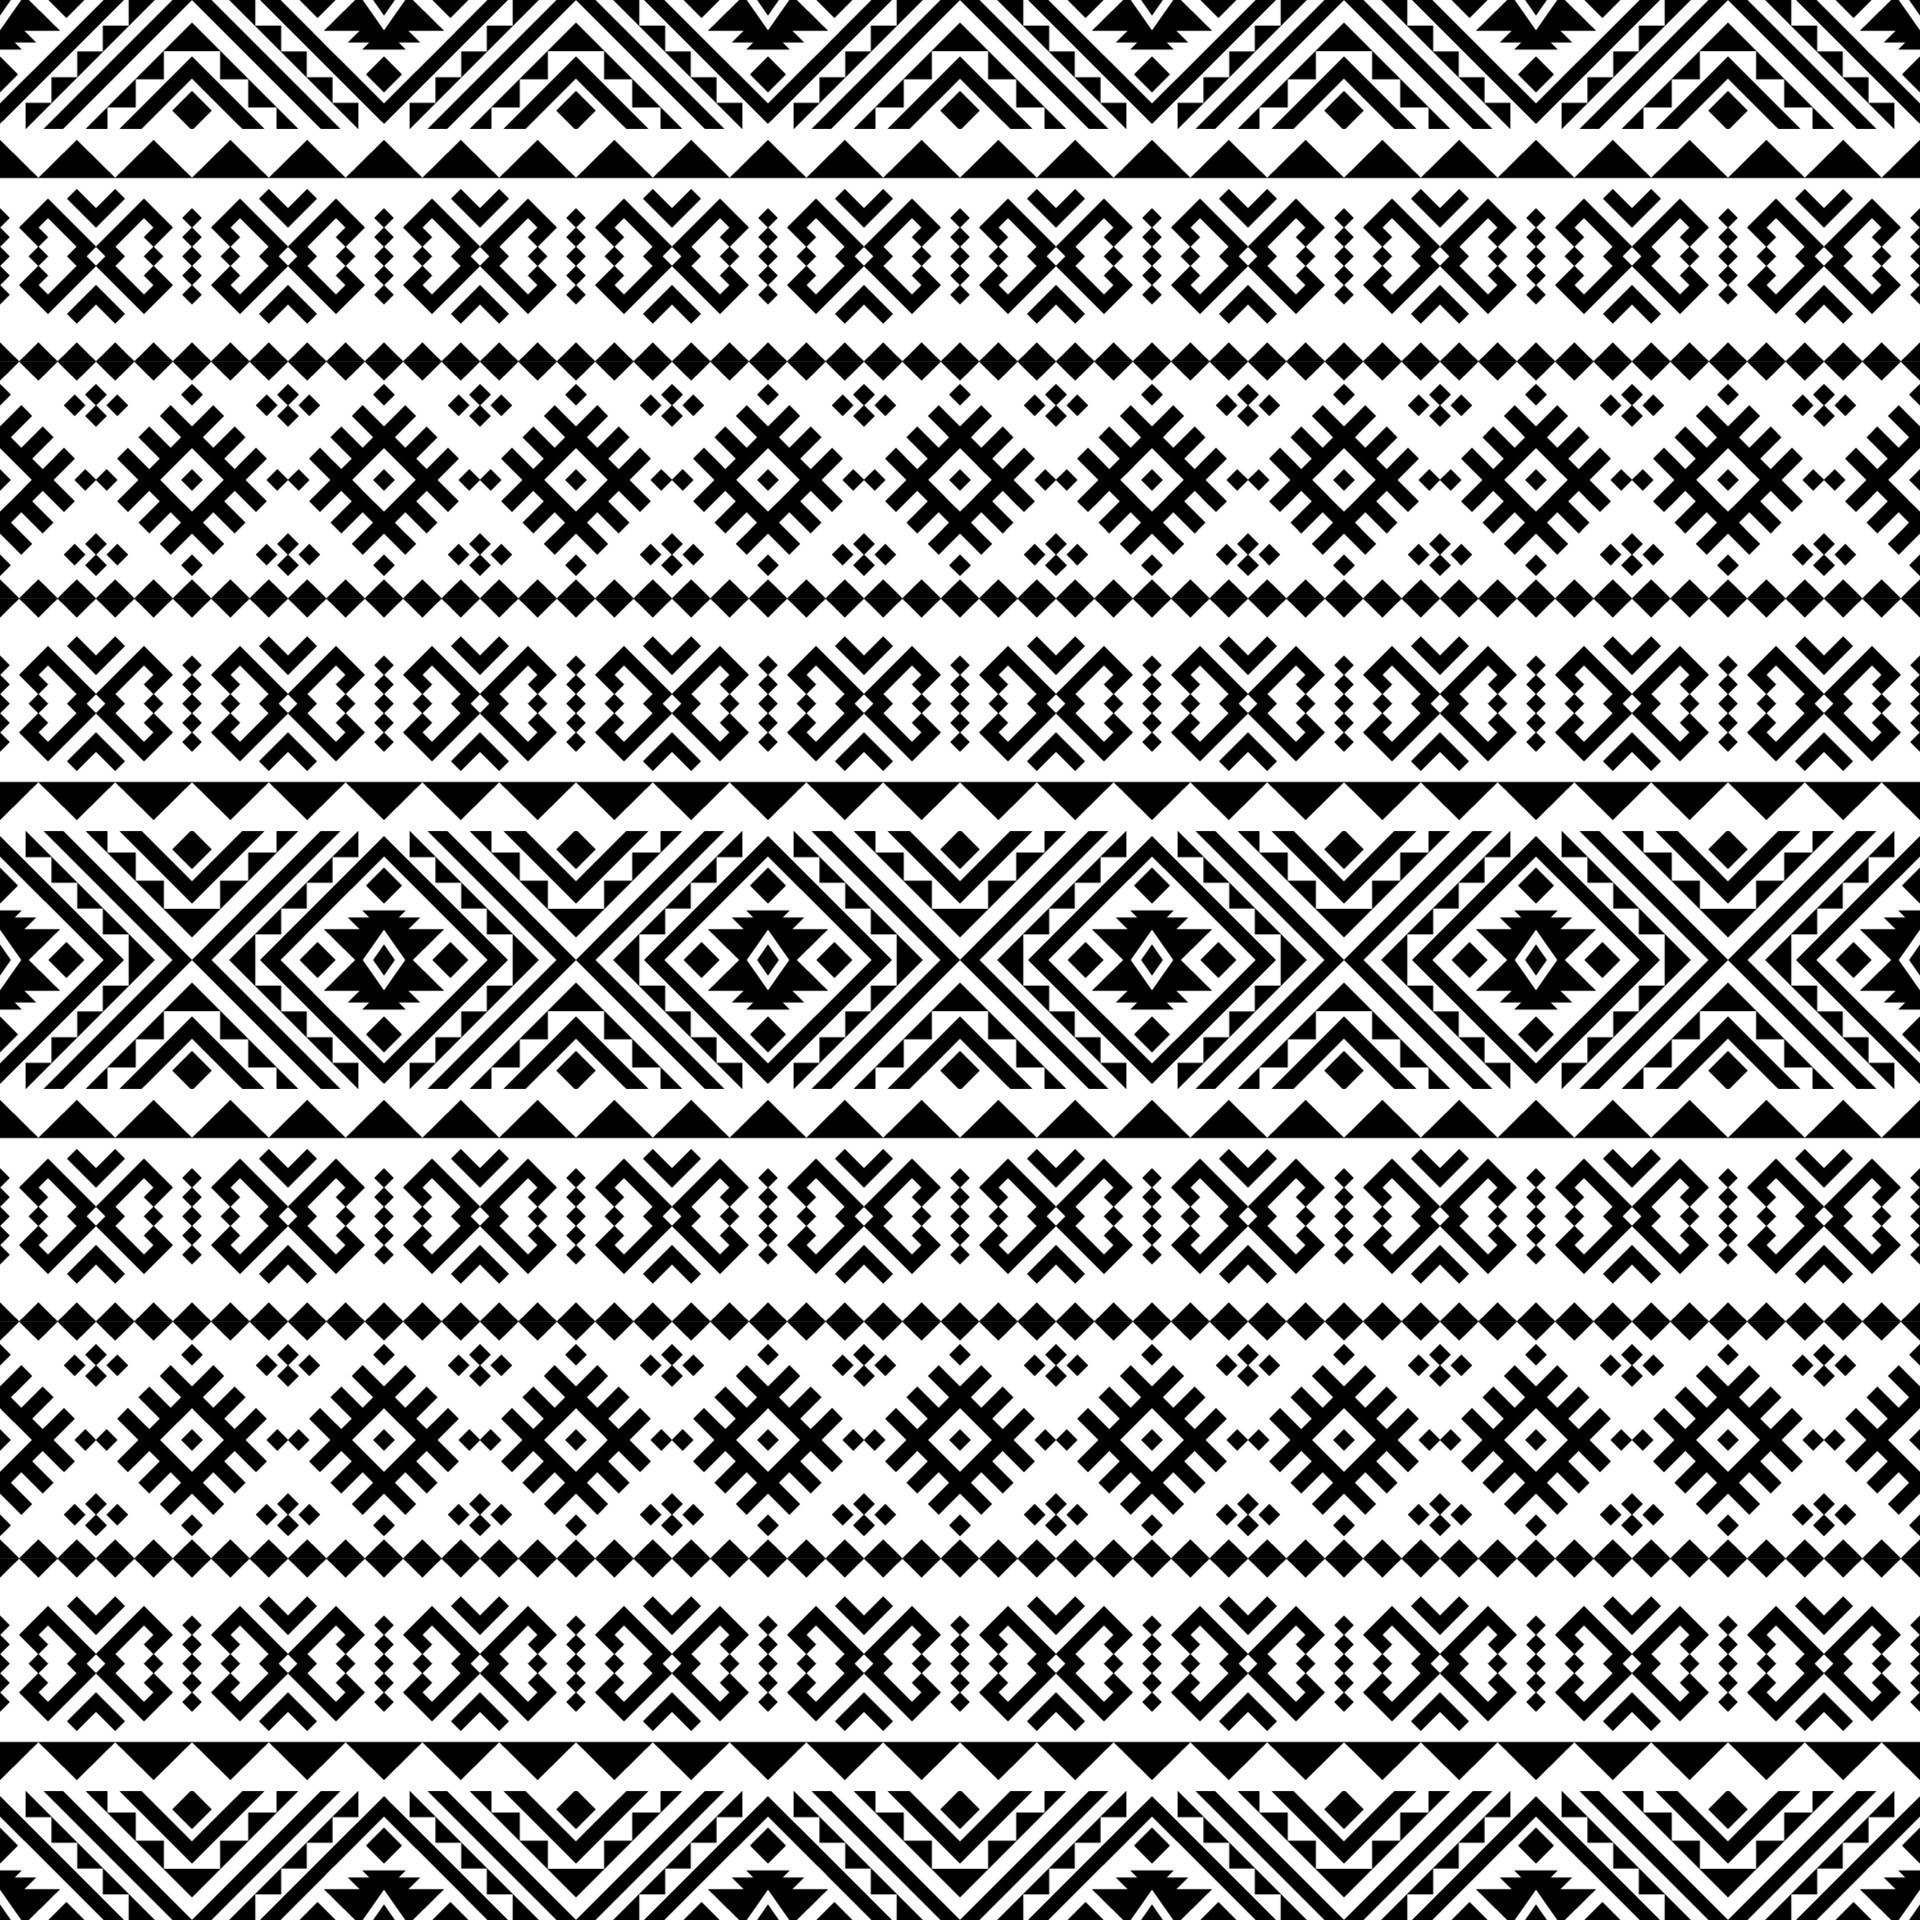 Ikat Aztec ethnic seamless patterns design in black and white color ...